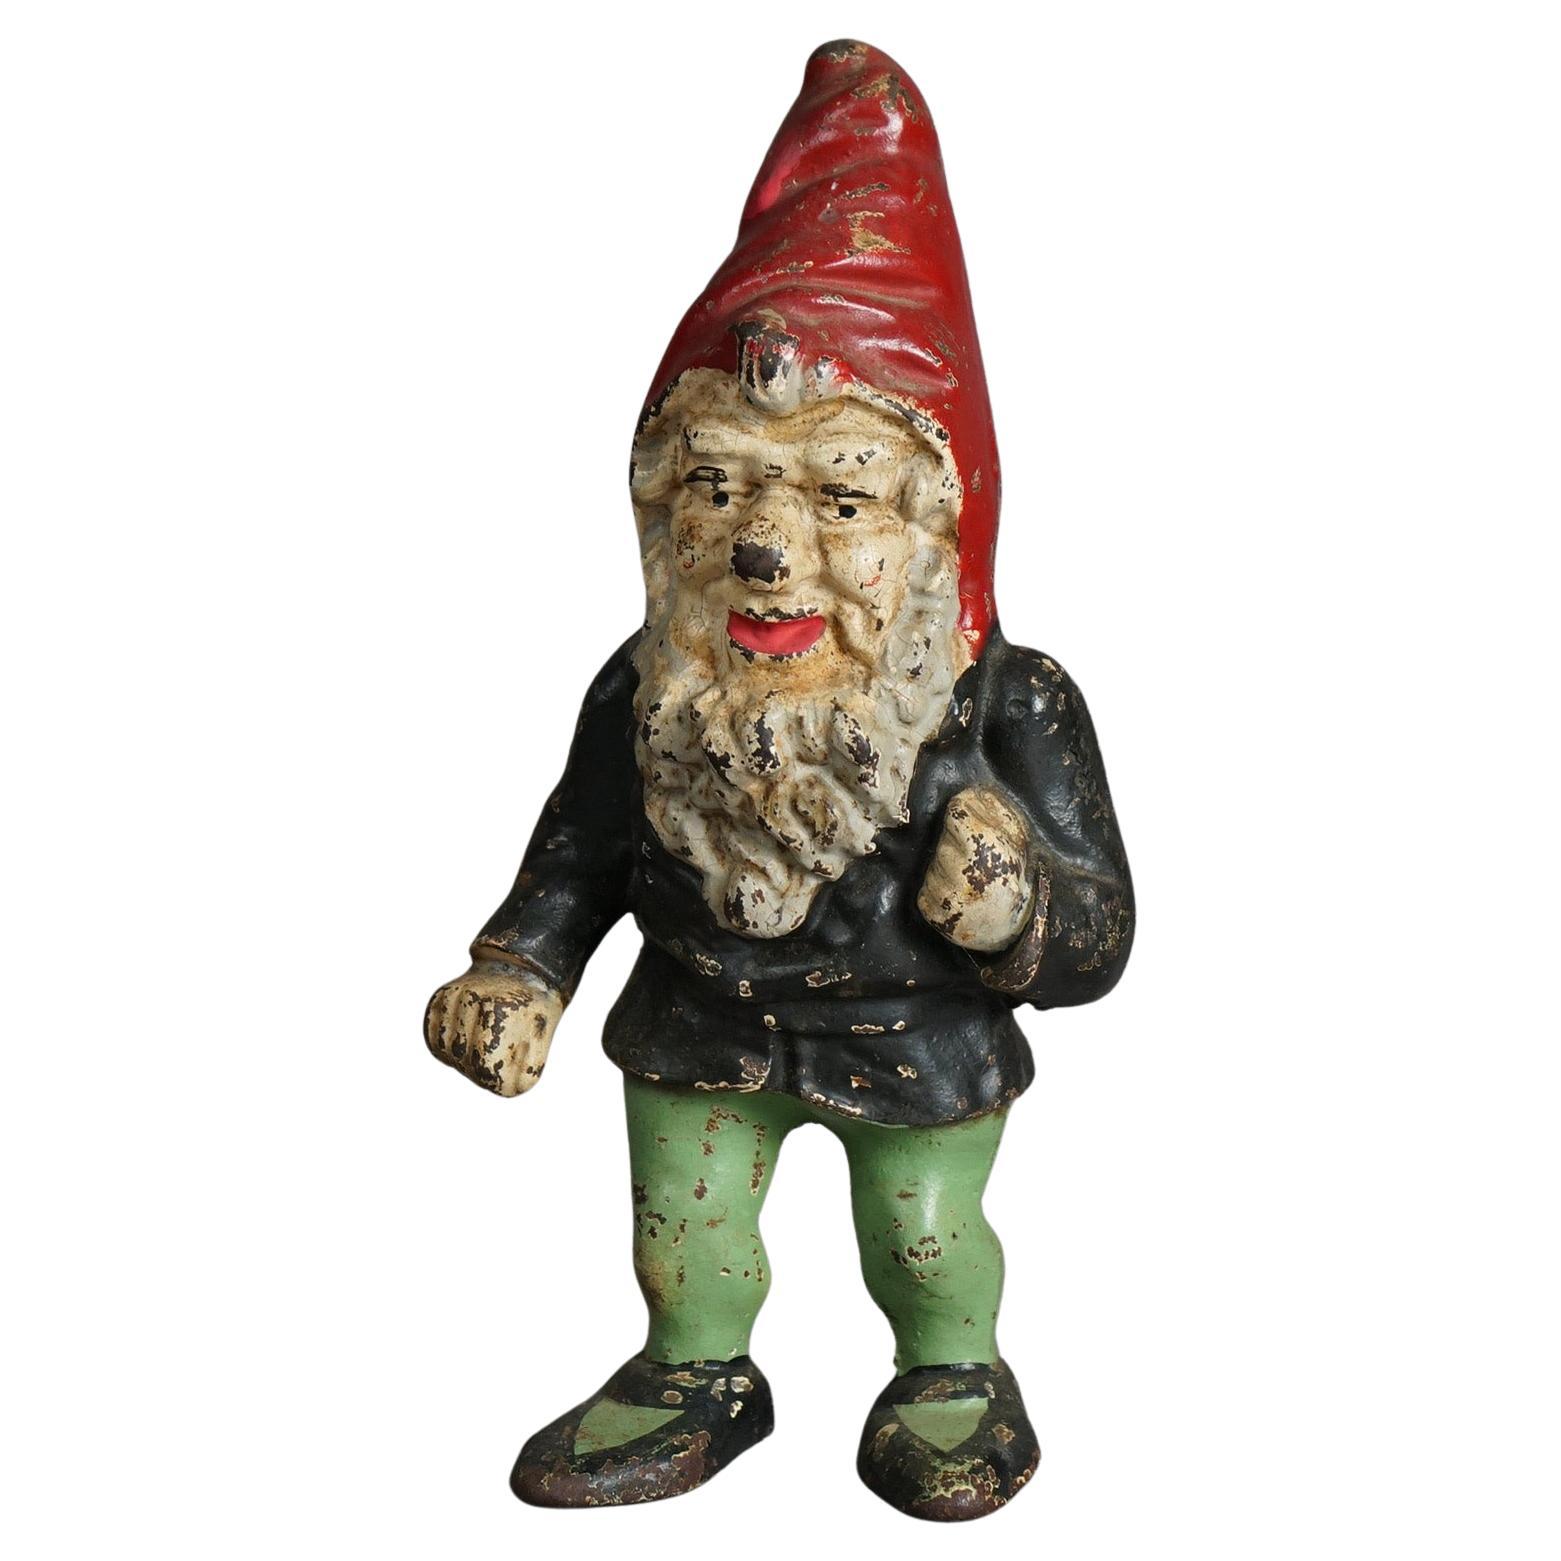 Antique & Rare Hubley Polychromed Figural Cast Iron Gnome Door Stop 19th C